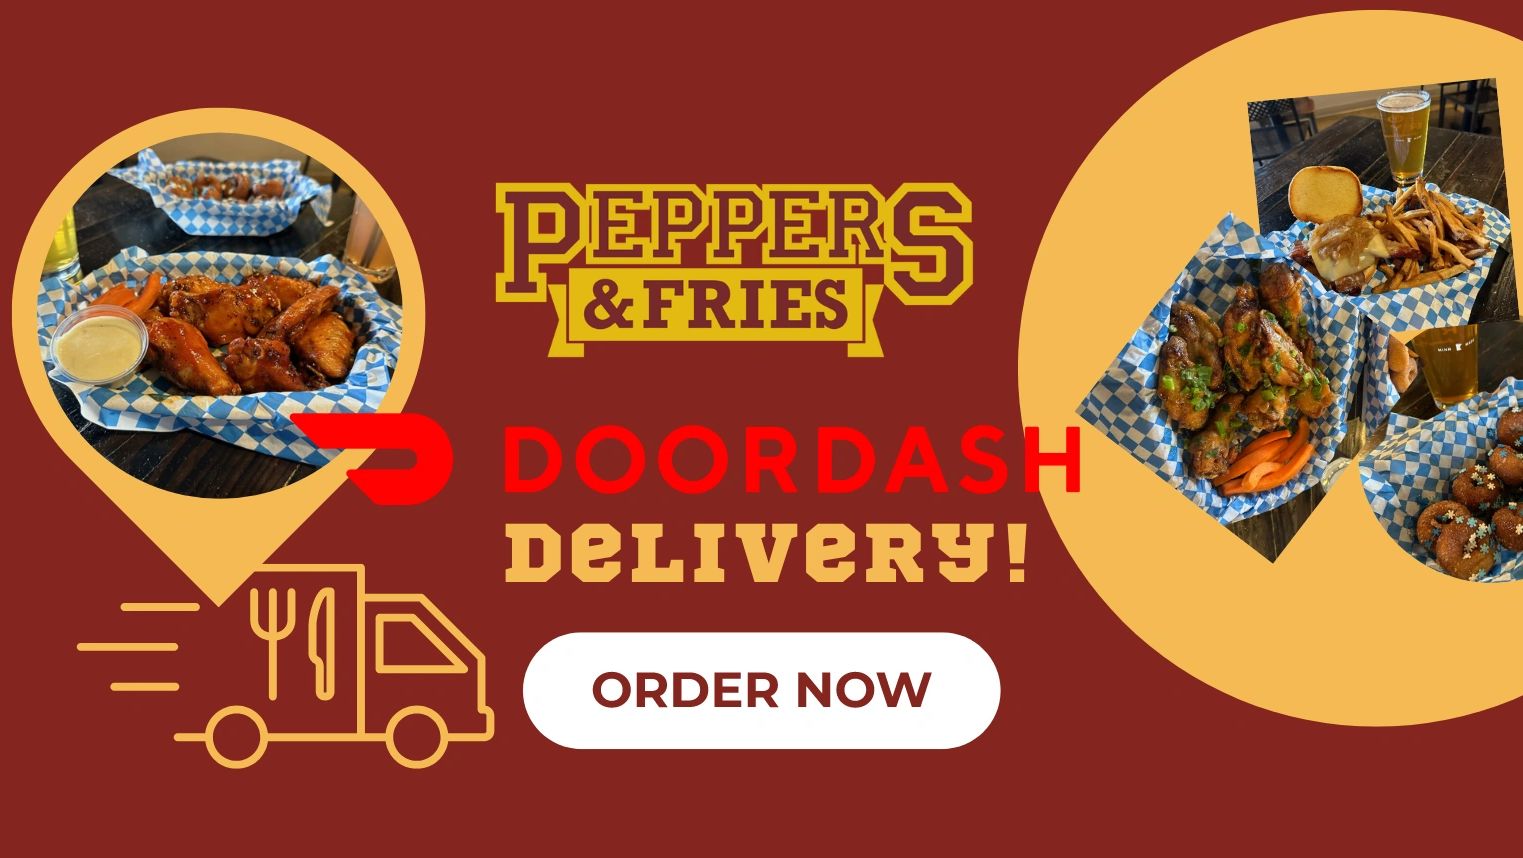 Get Peppers & Fries delivered or pickup in store with DoorDash!